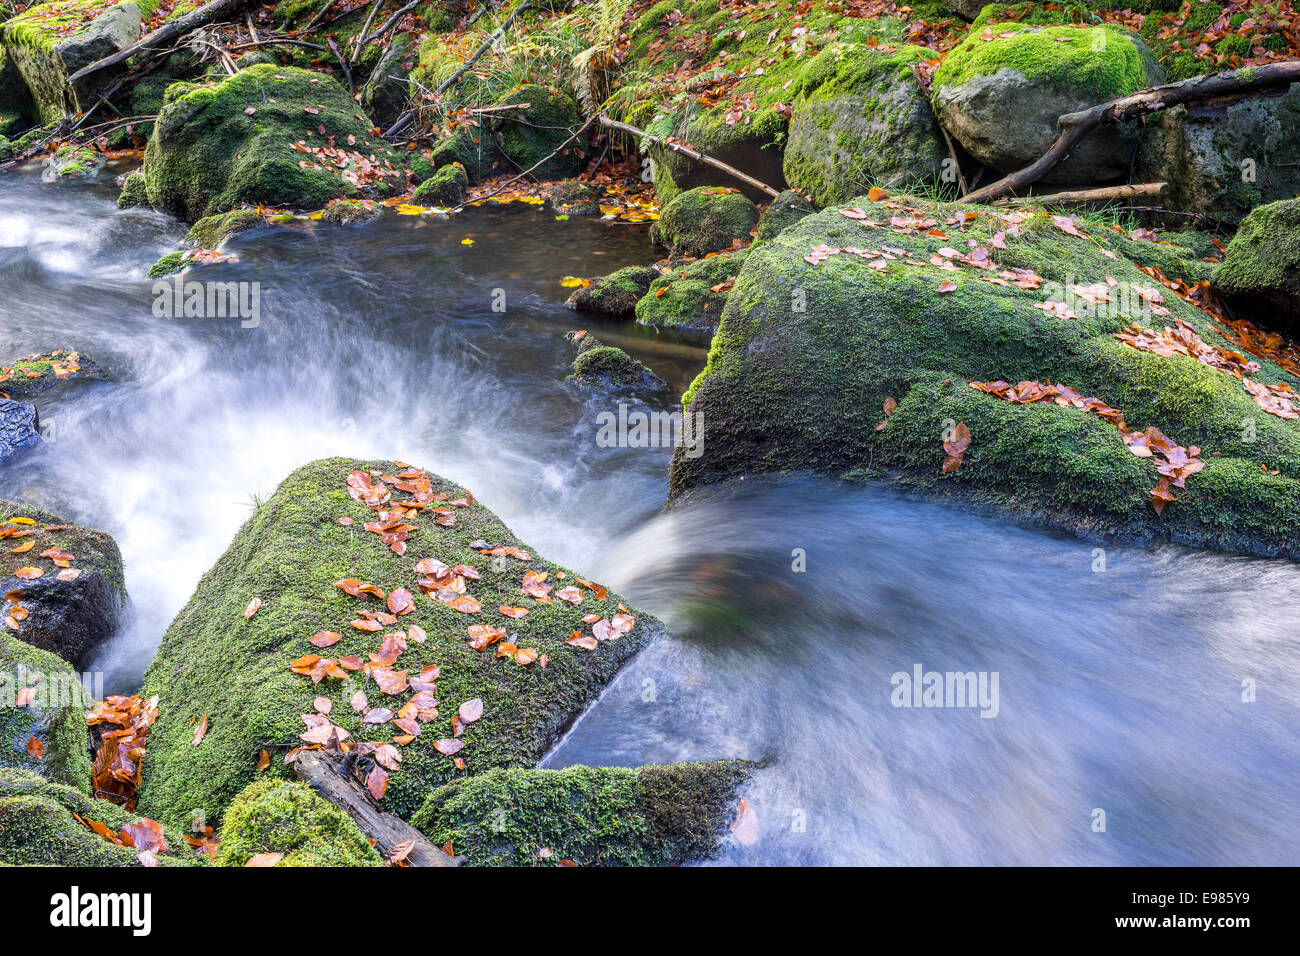 Current water flowing quickly between boulders covered with moss and fallen leaves Stock Photo